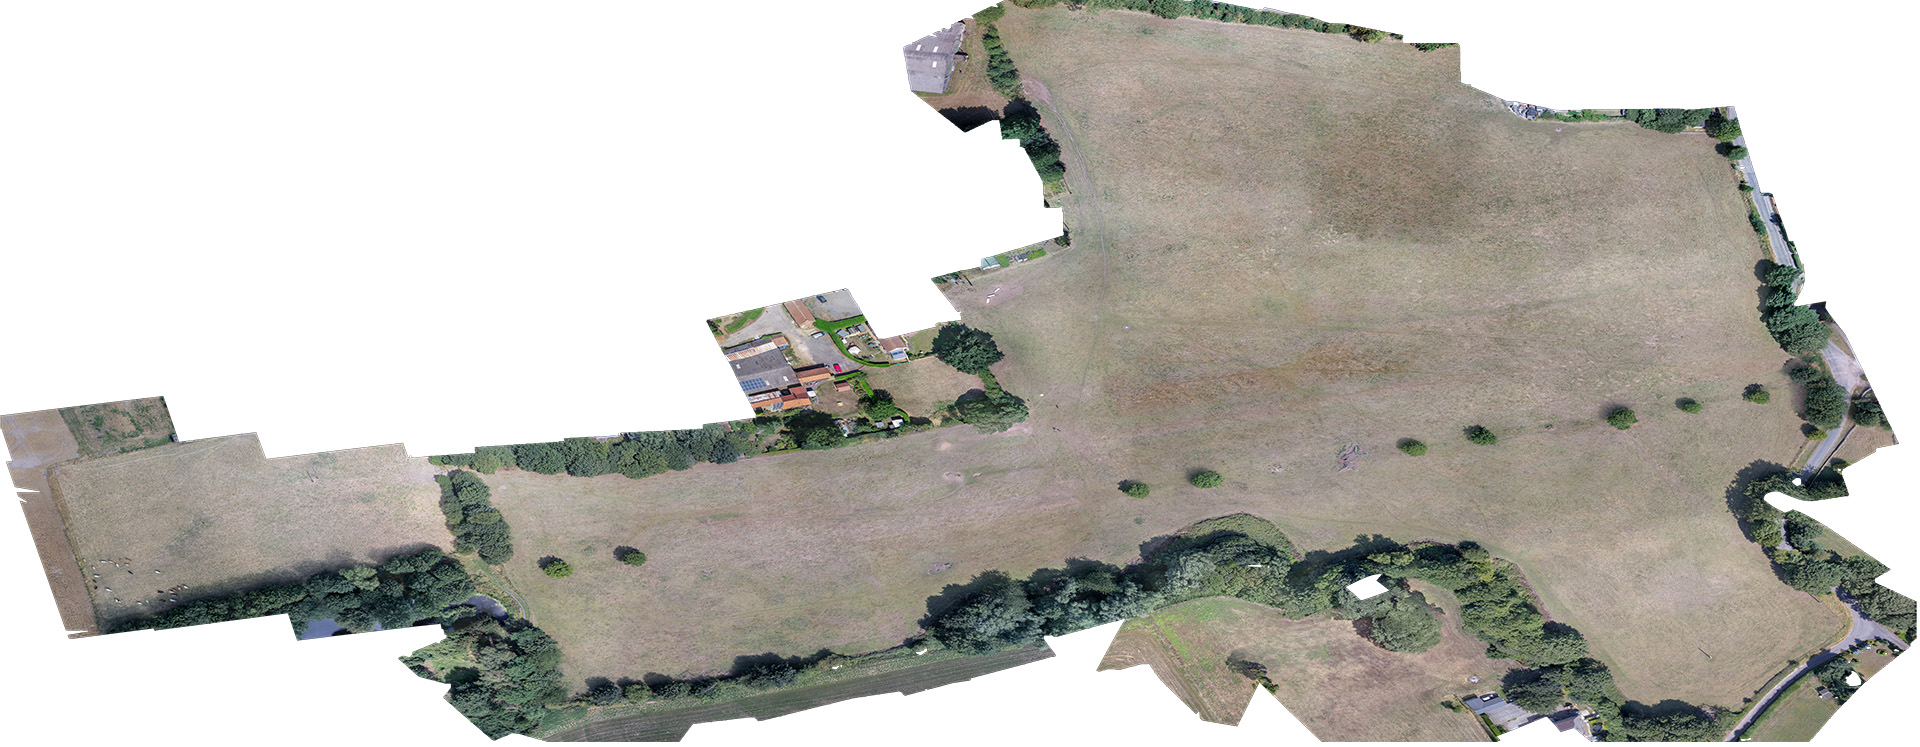 Orthomosaic image of Harpswell archaeology site